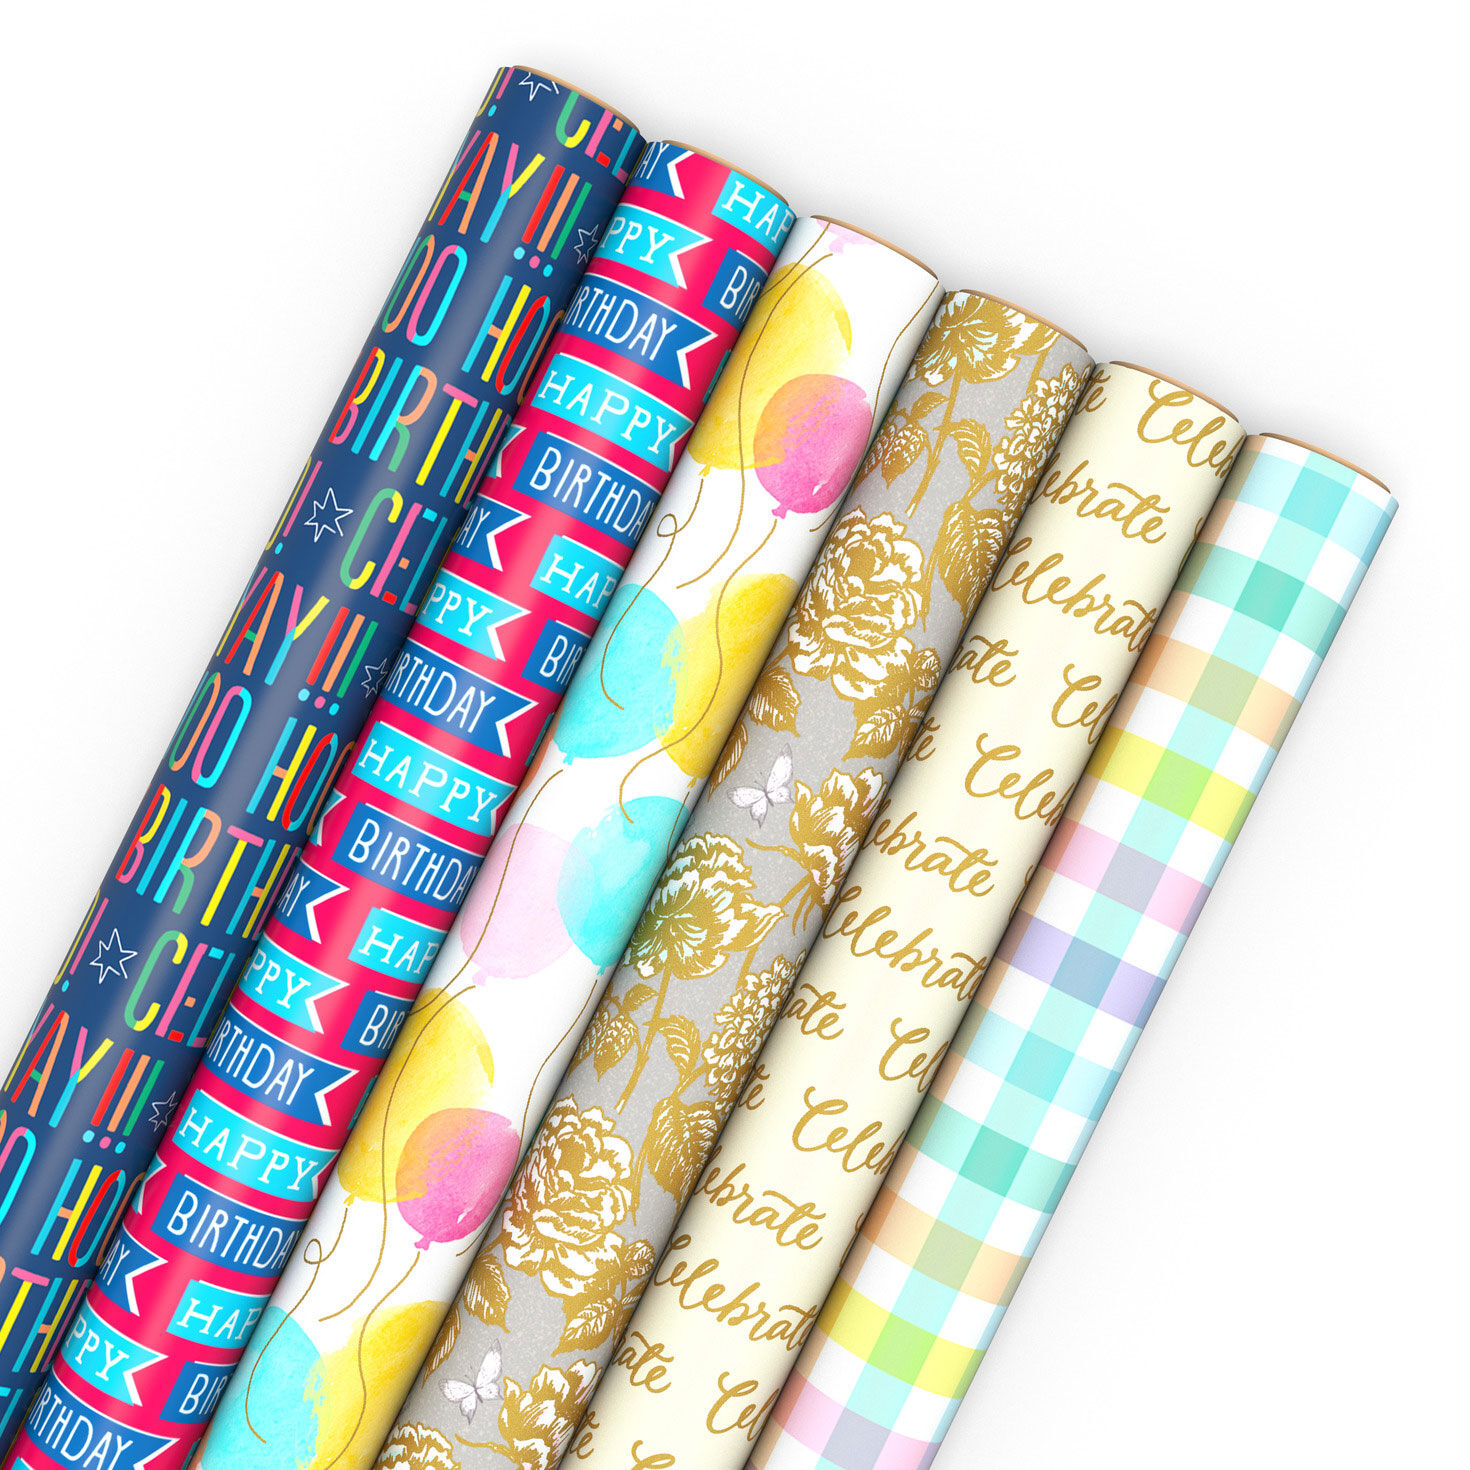 Gold and White 6-Pack Holiday Wrapping Paper Assortment, 180 sq. ft. -  Wrapping Paper Sets - Hallmark